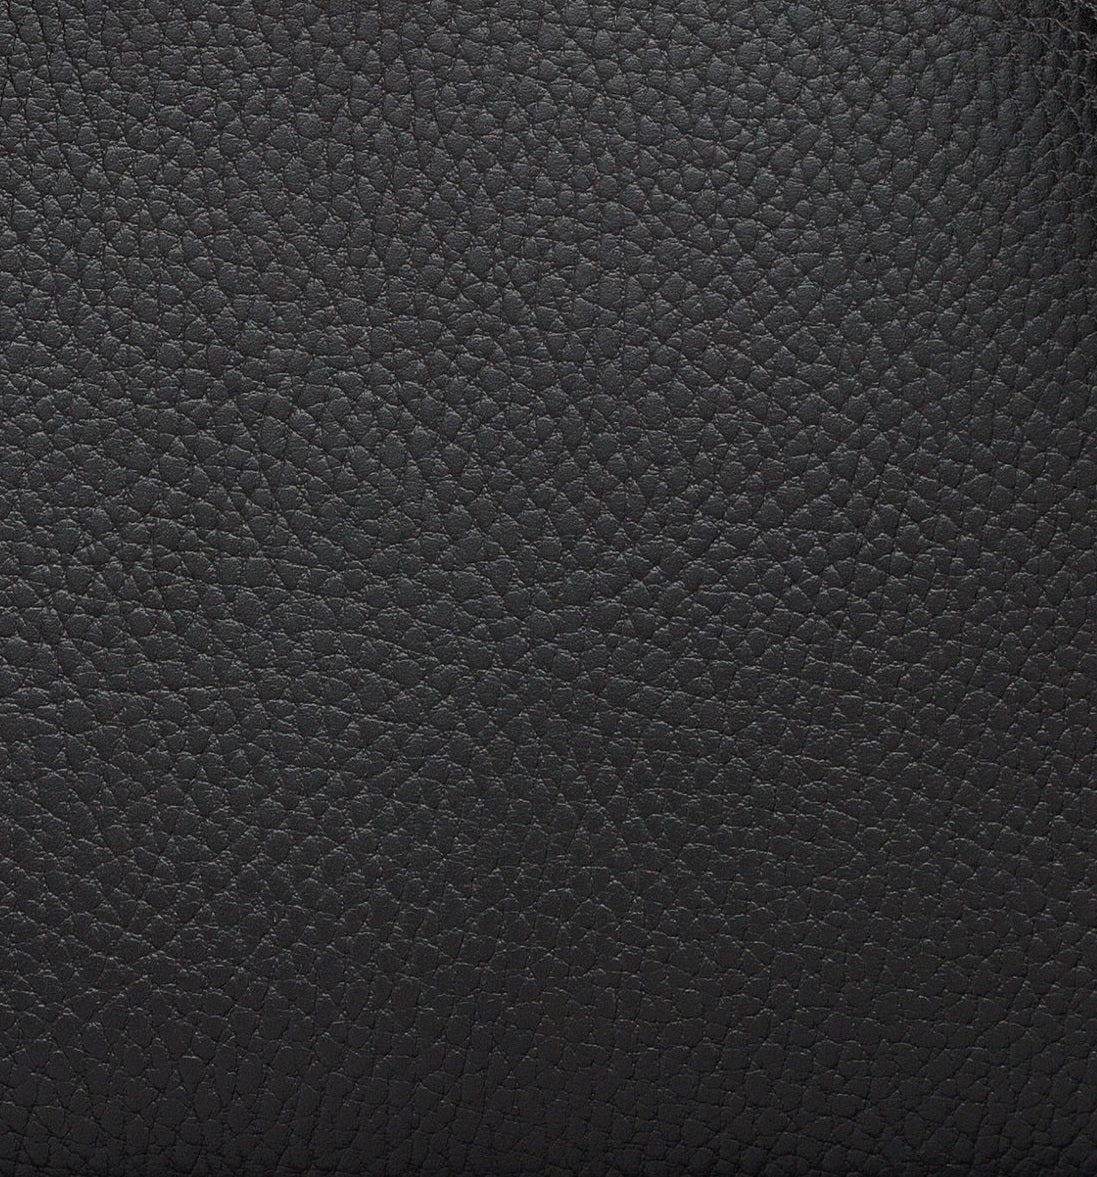 Ultimate Hermes Leathers Guide: What Are Hermes Bags Made Of? hermes ardennes leather